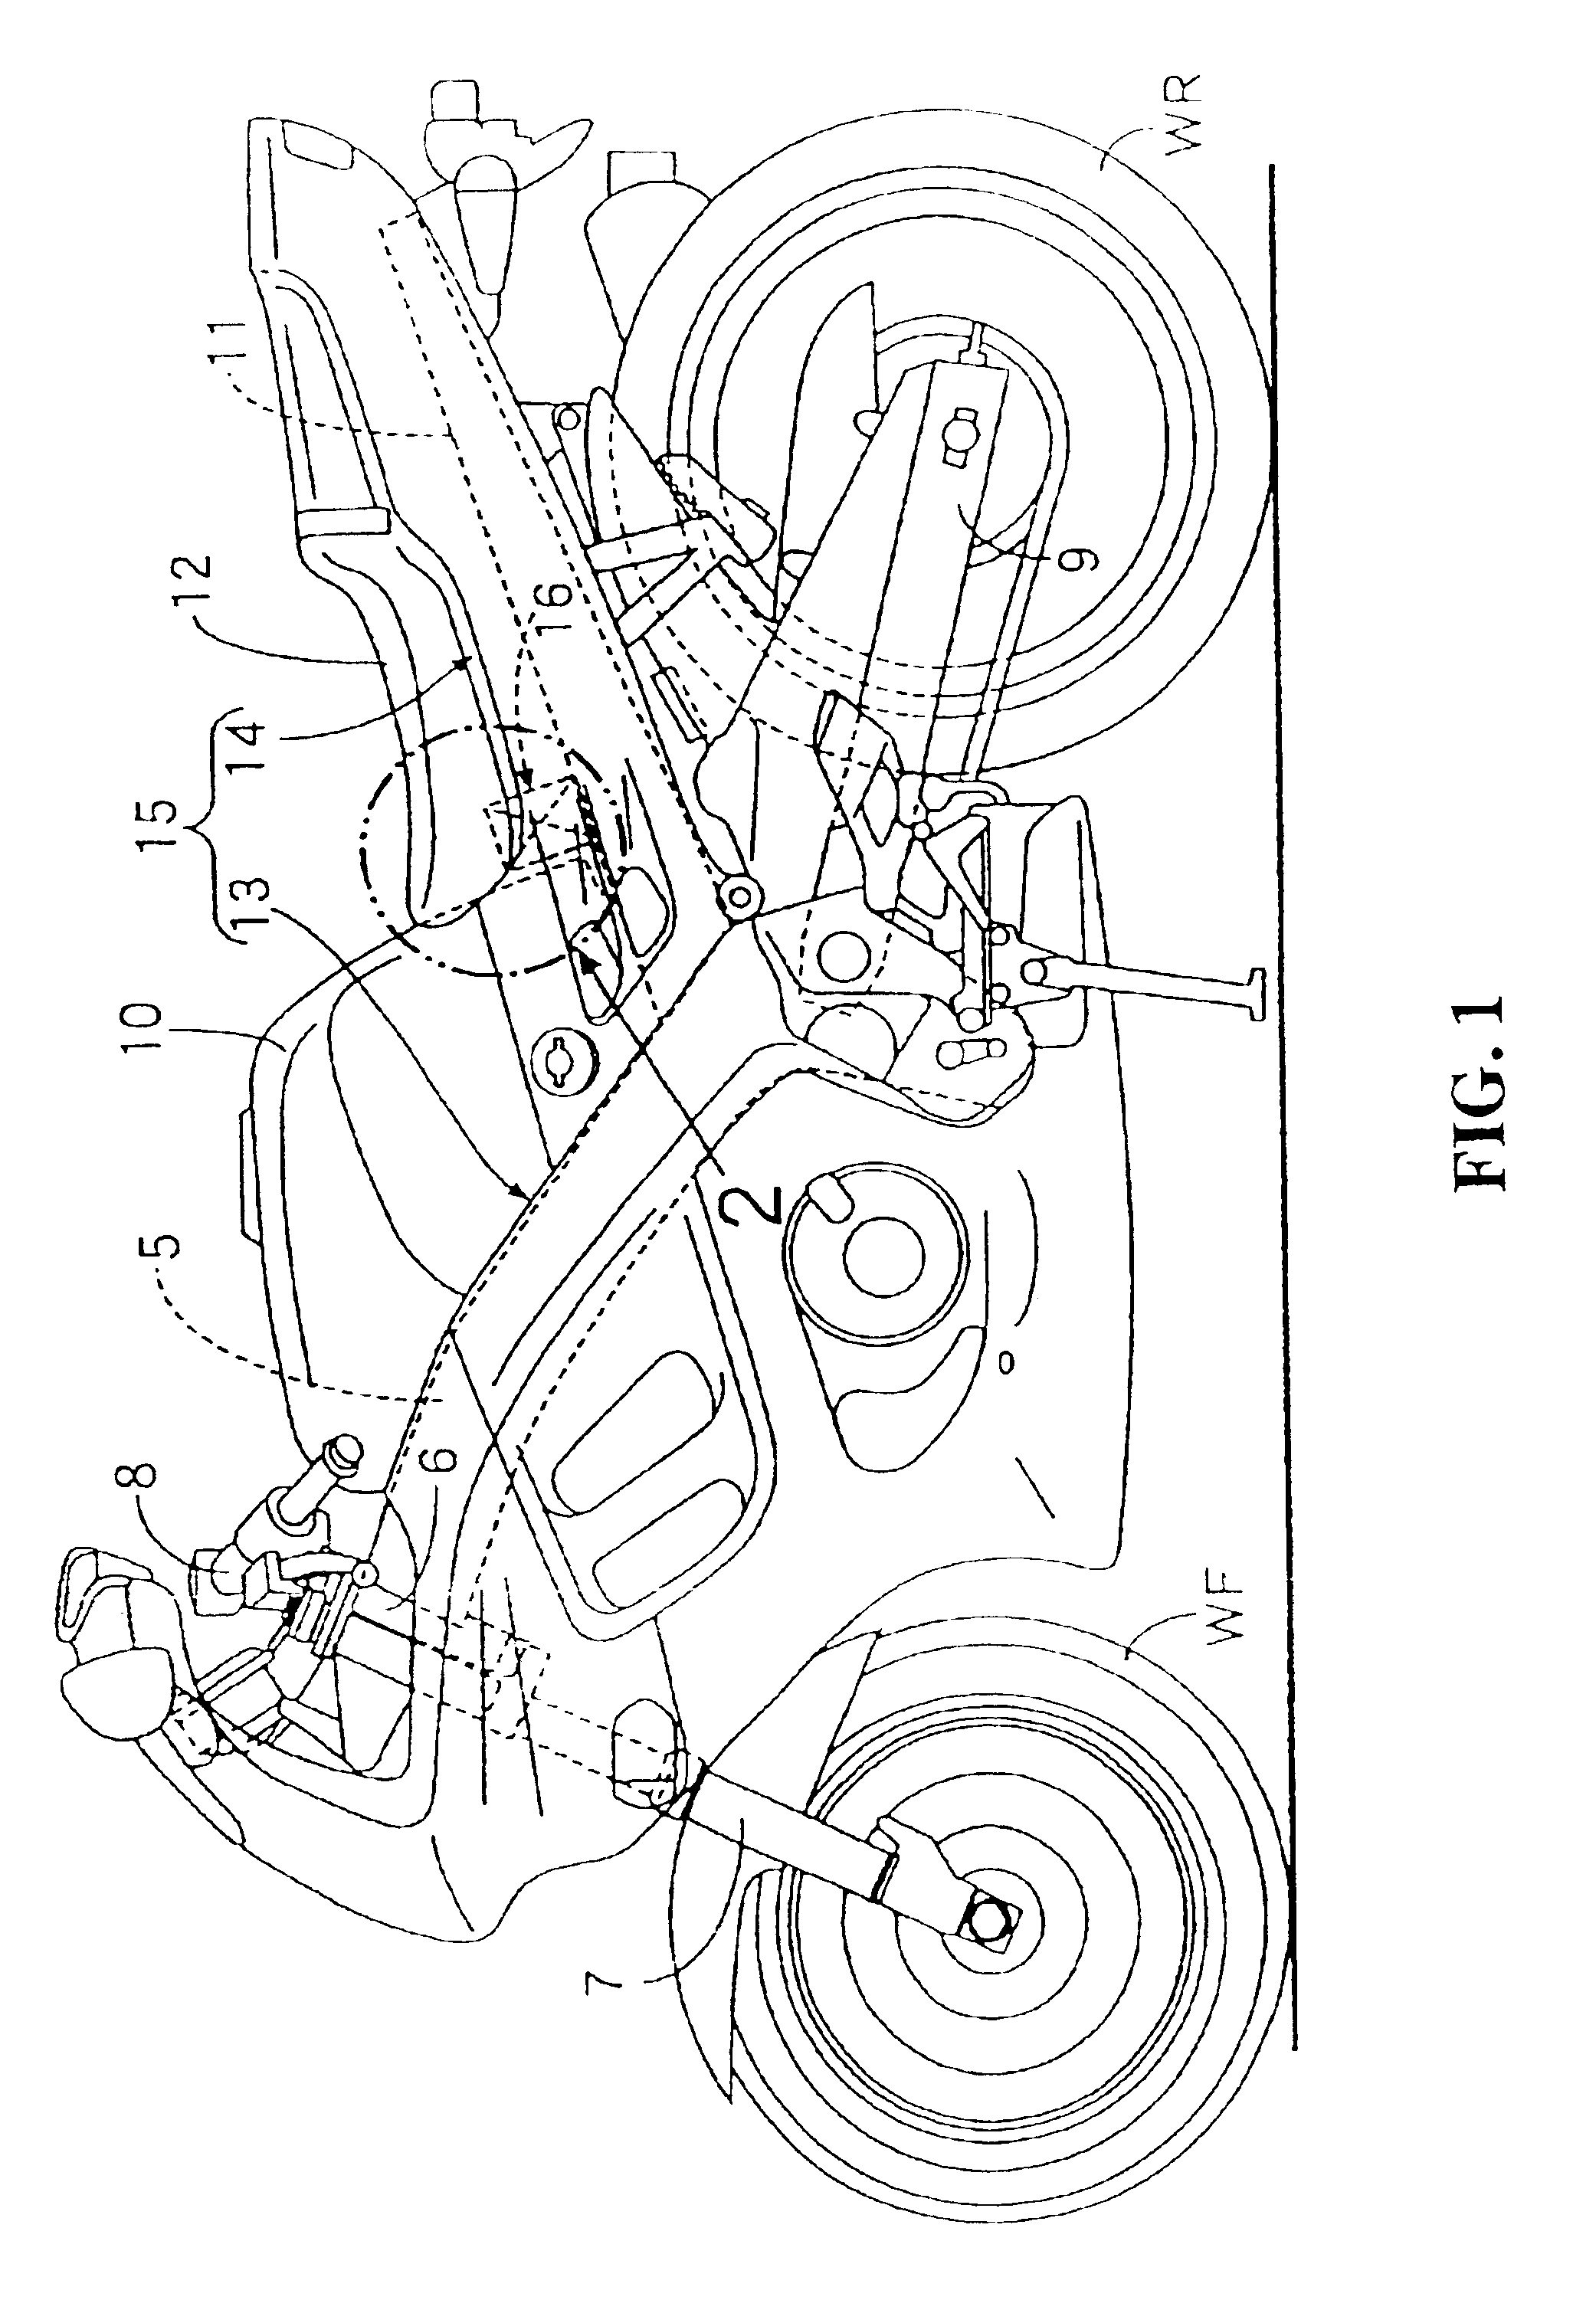 Airbag apparatus for motorcycles